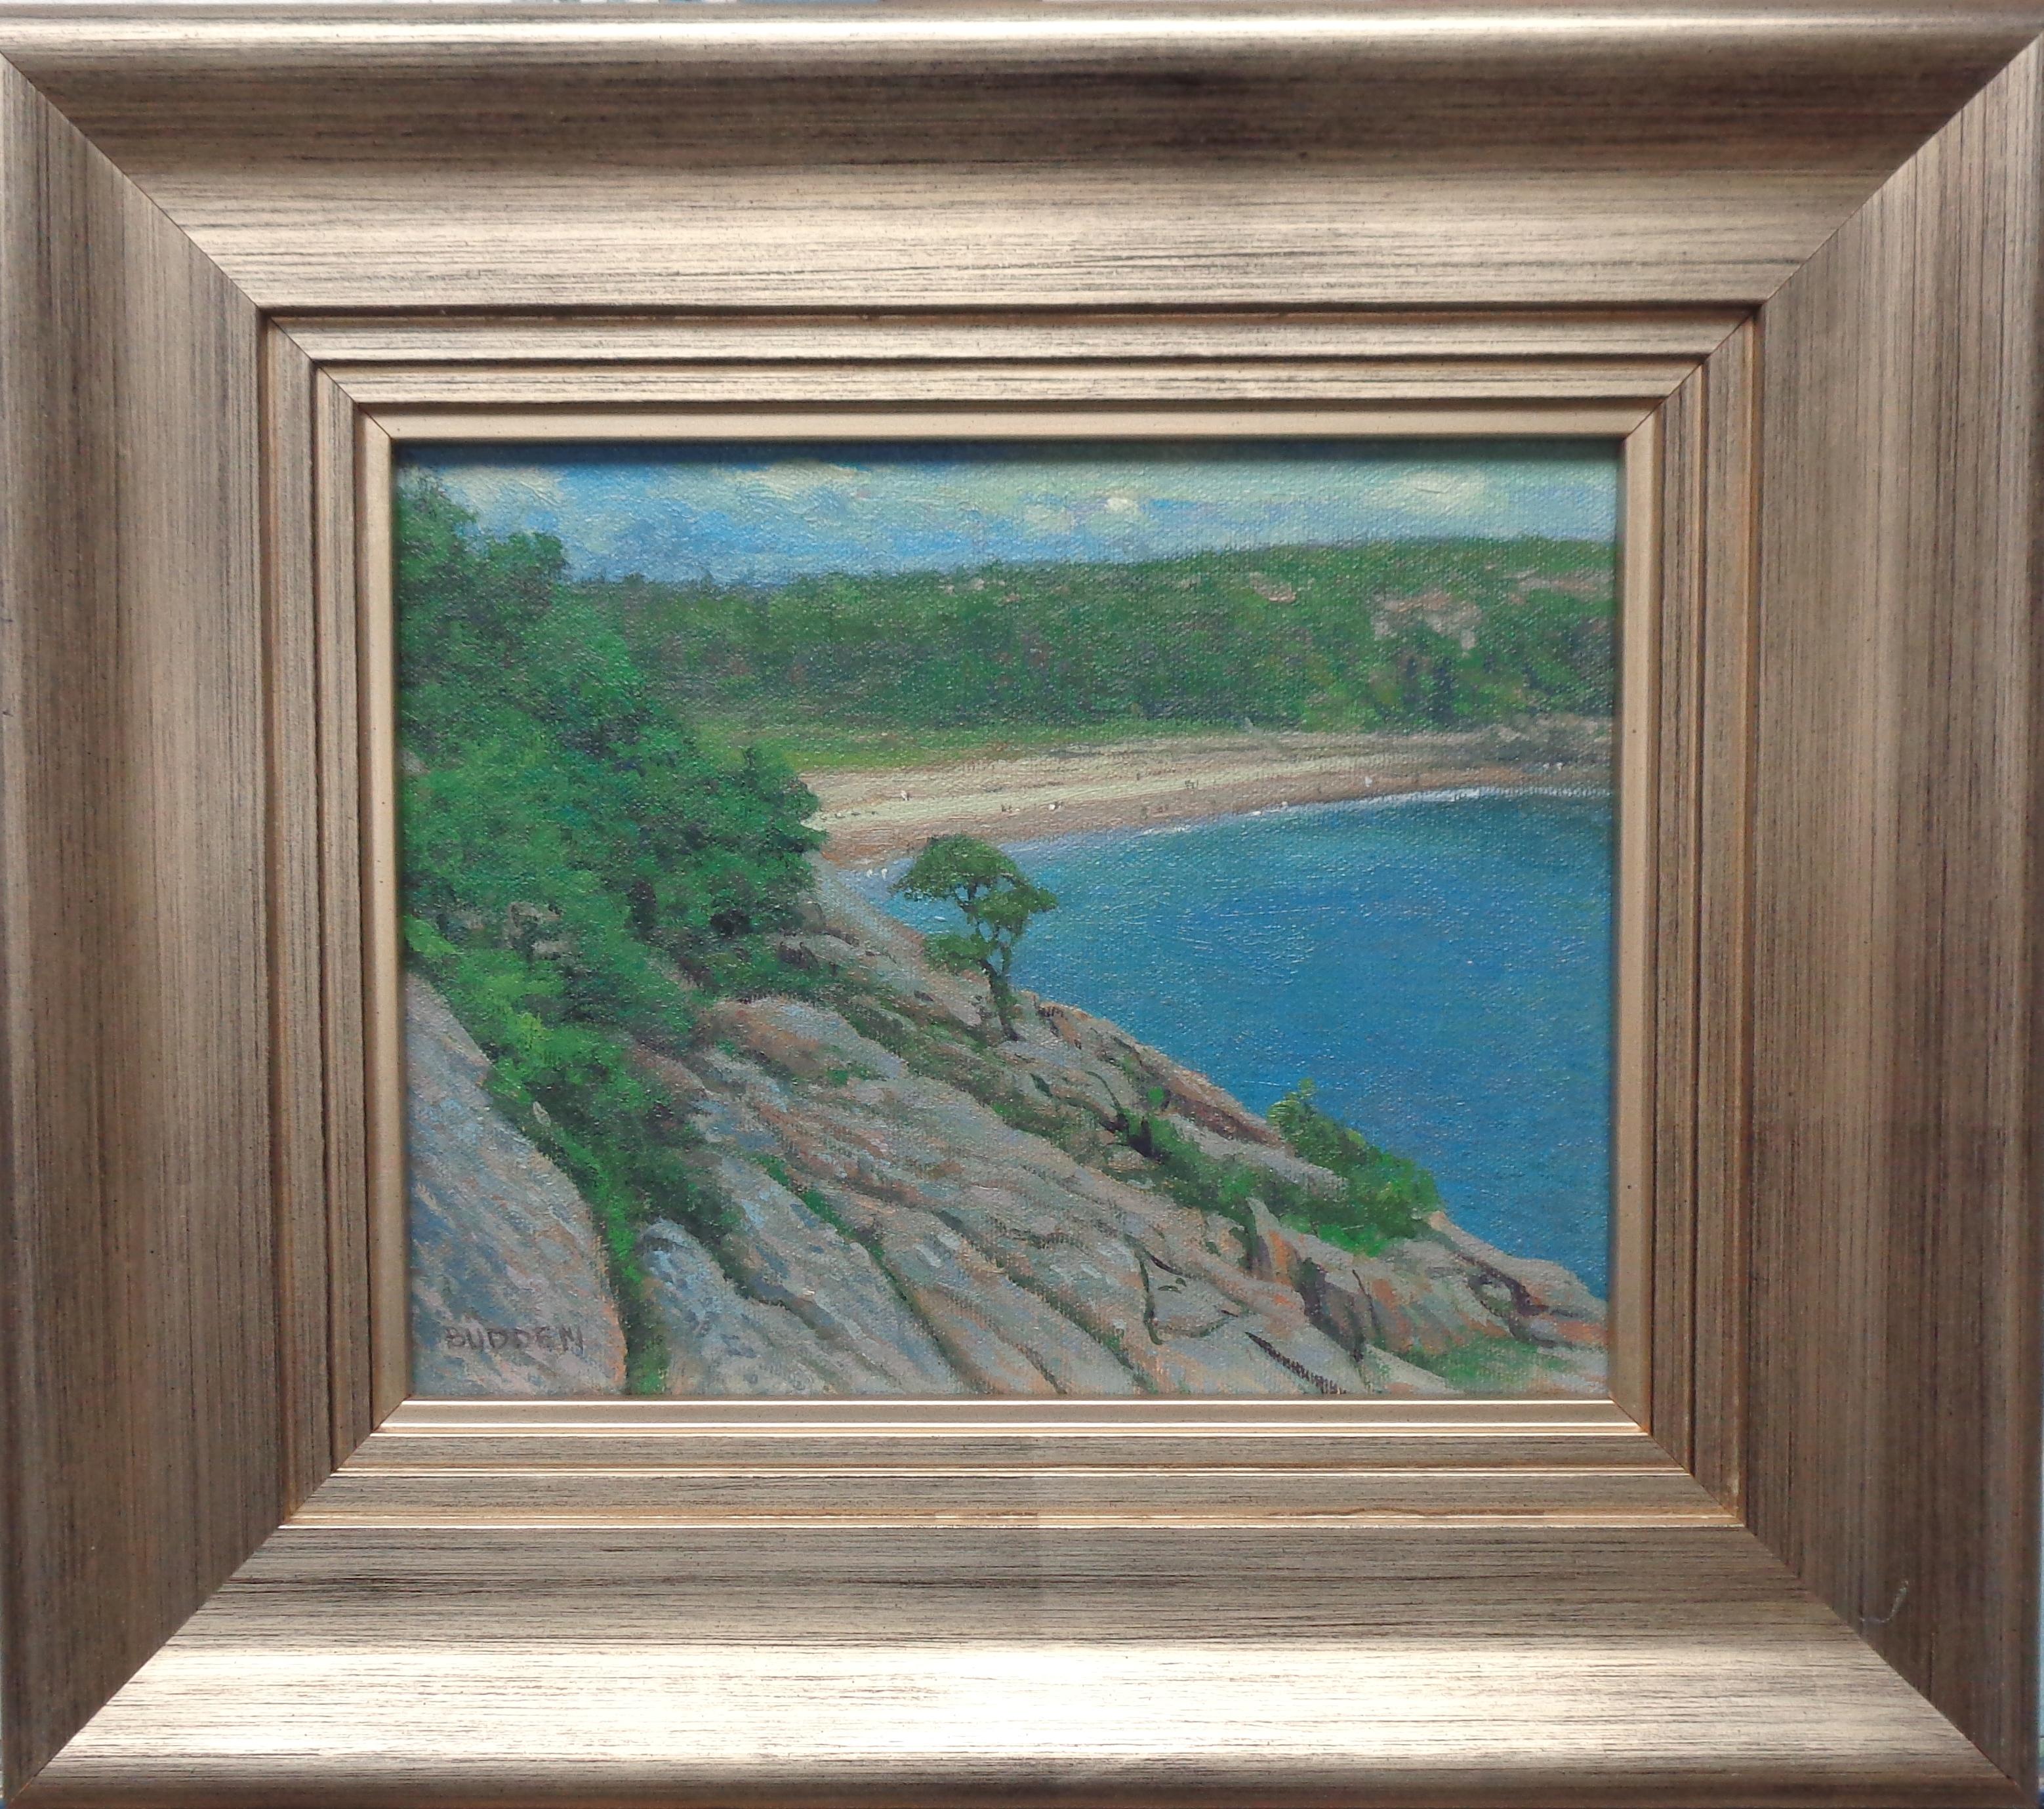 Sand beach Overlook is an oil painting on canvas by award winning contemporary artist Michael Budden that showcases a beautiful view of Sand Beach in Acadia National Park. The image measures 8 x 10 unframed and 13.50 x 15.50 framed.  
ARTIST'S